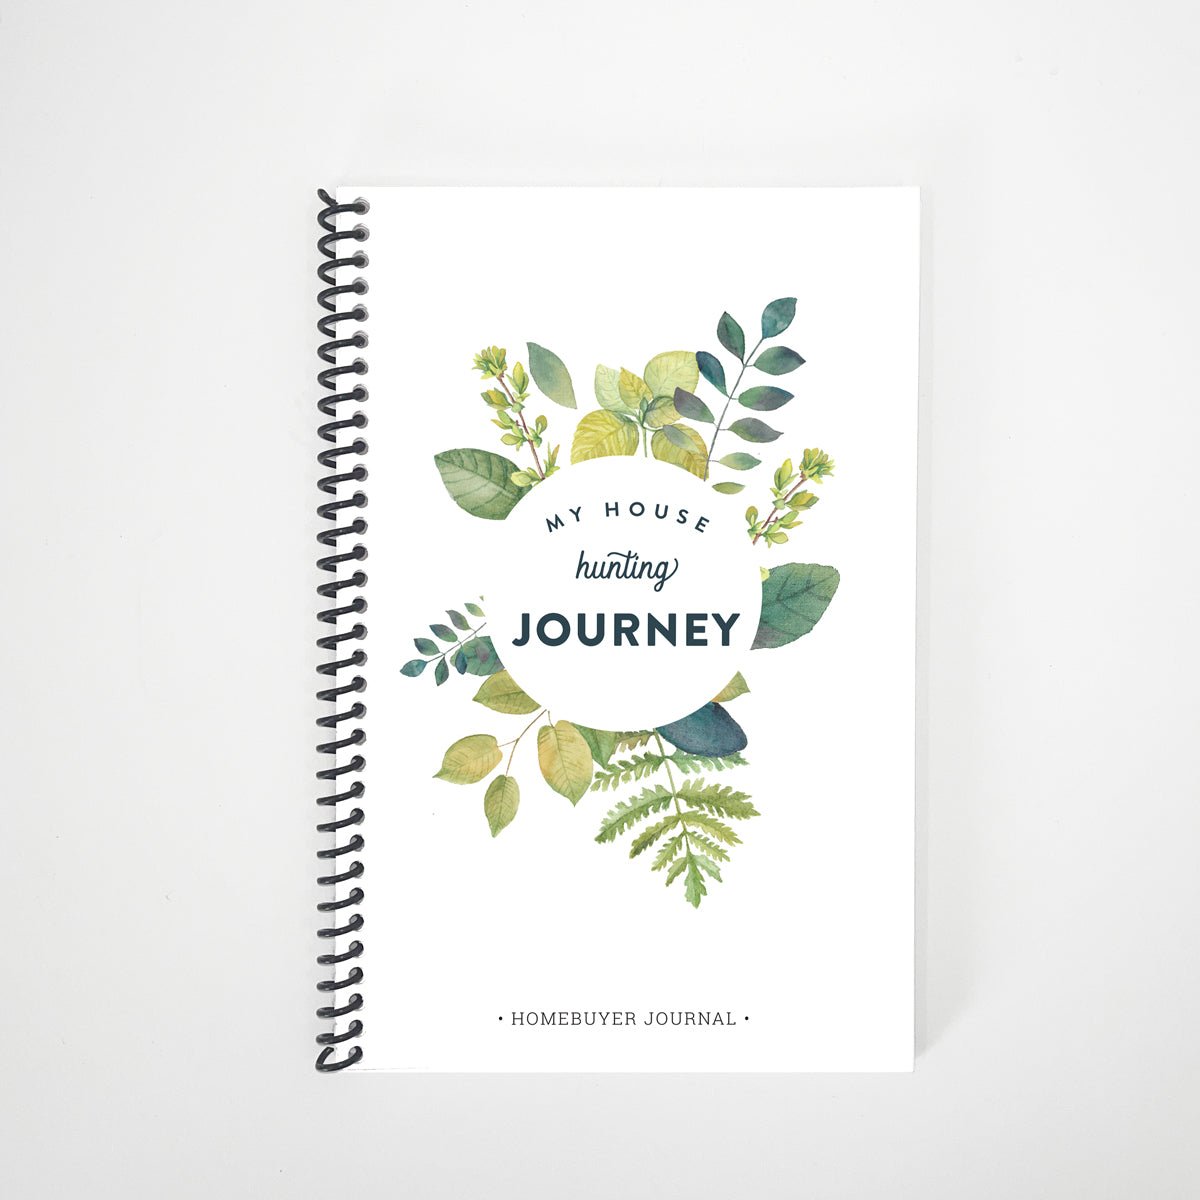 Homebuyer Journal - House Hunting Journey - Botanical - All Things Real Estate